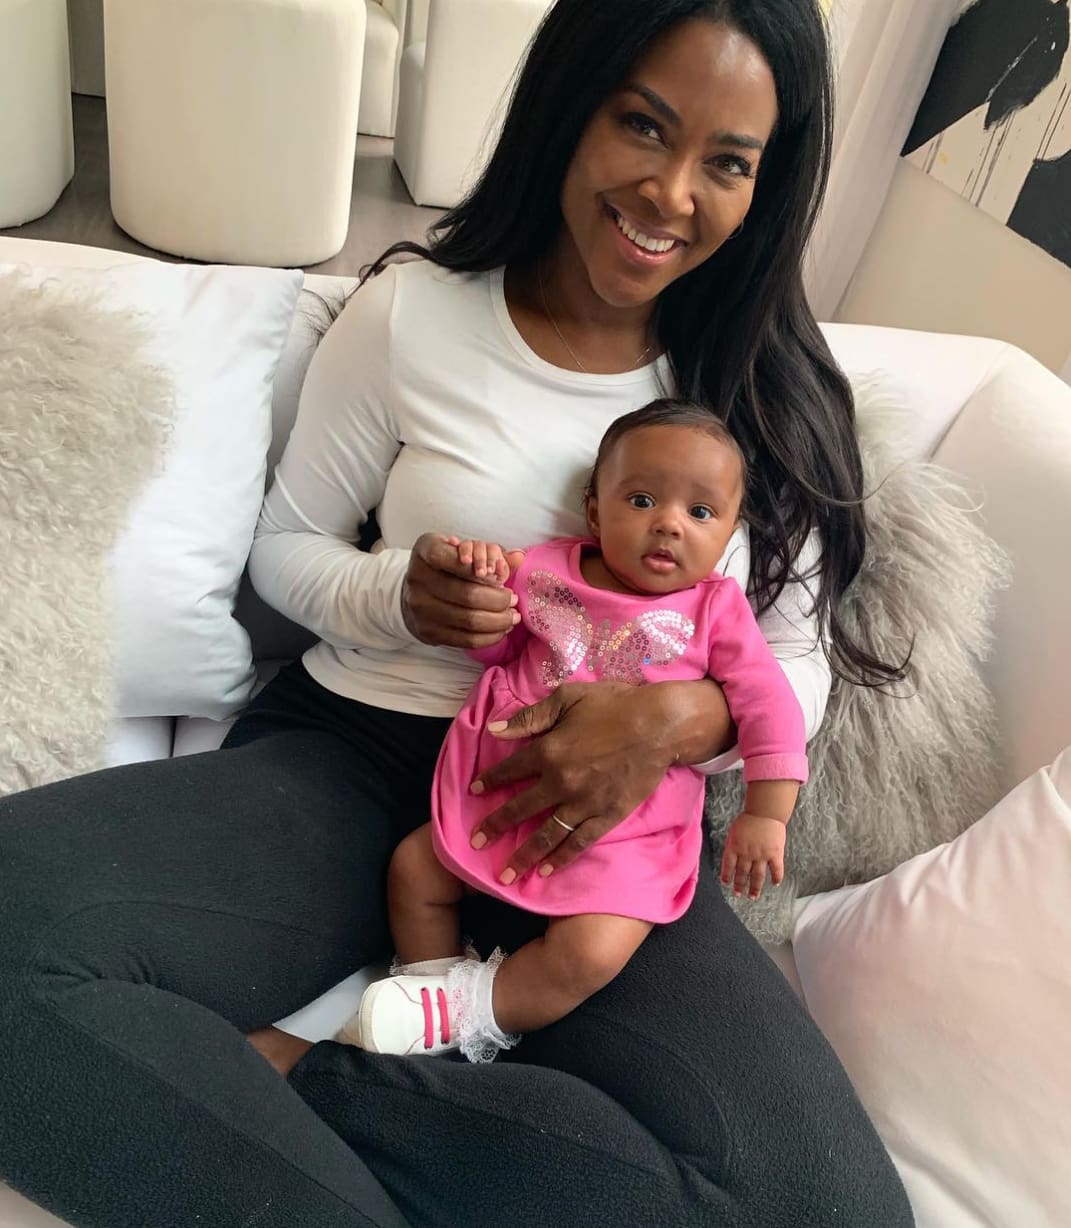 Kenya Moore And Marc Daly Are The Proudest Parents - Watch The Latest Video Of Baby Brooklyn